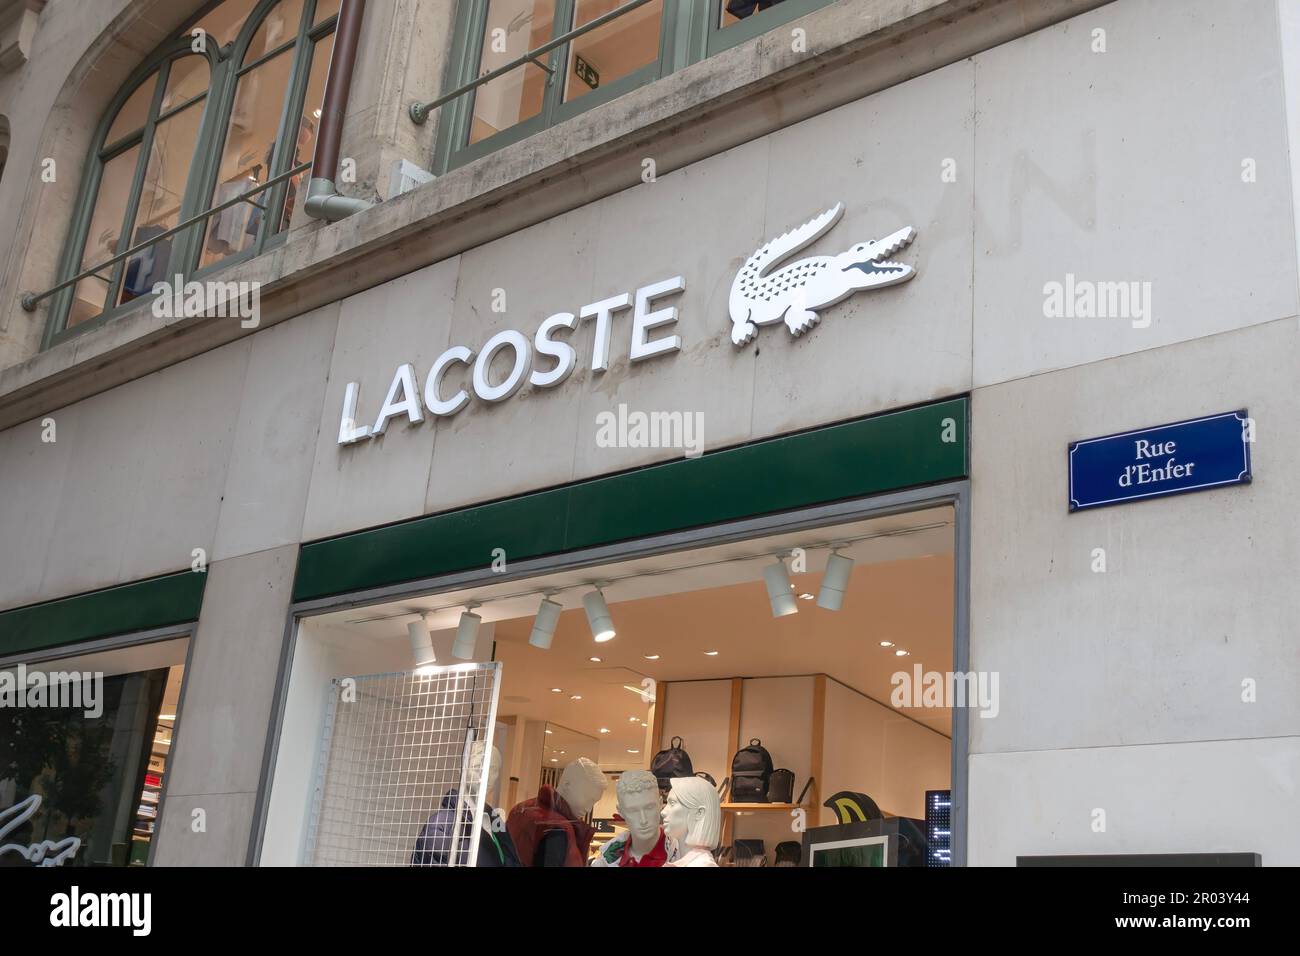 Geneva, Switzerland - Jan 14, 2023: Lacoste store in Geneva. Lacoste S.A. is a French company, founded in 1933 by tennis player René Lacoste. Stock Photo